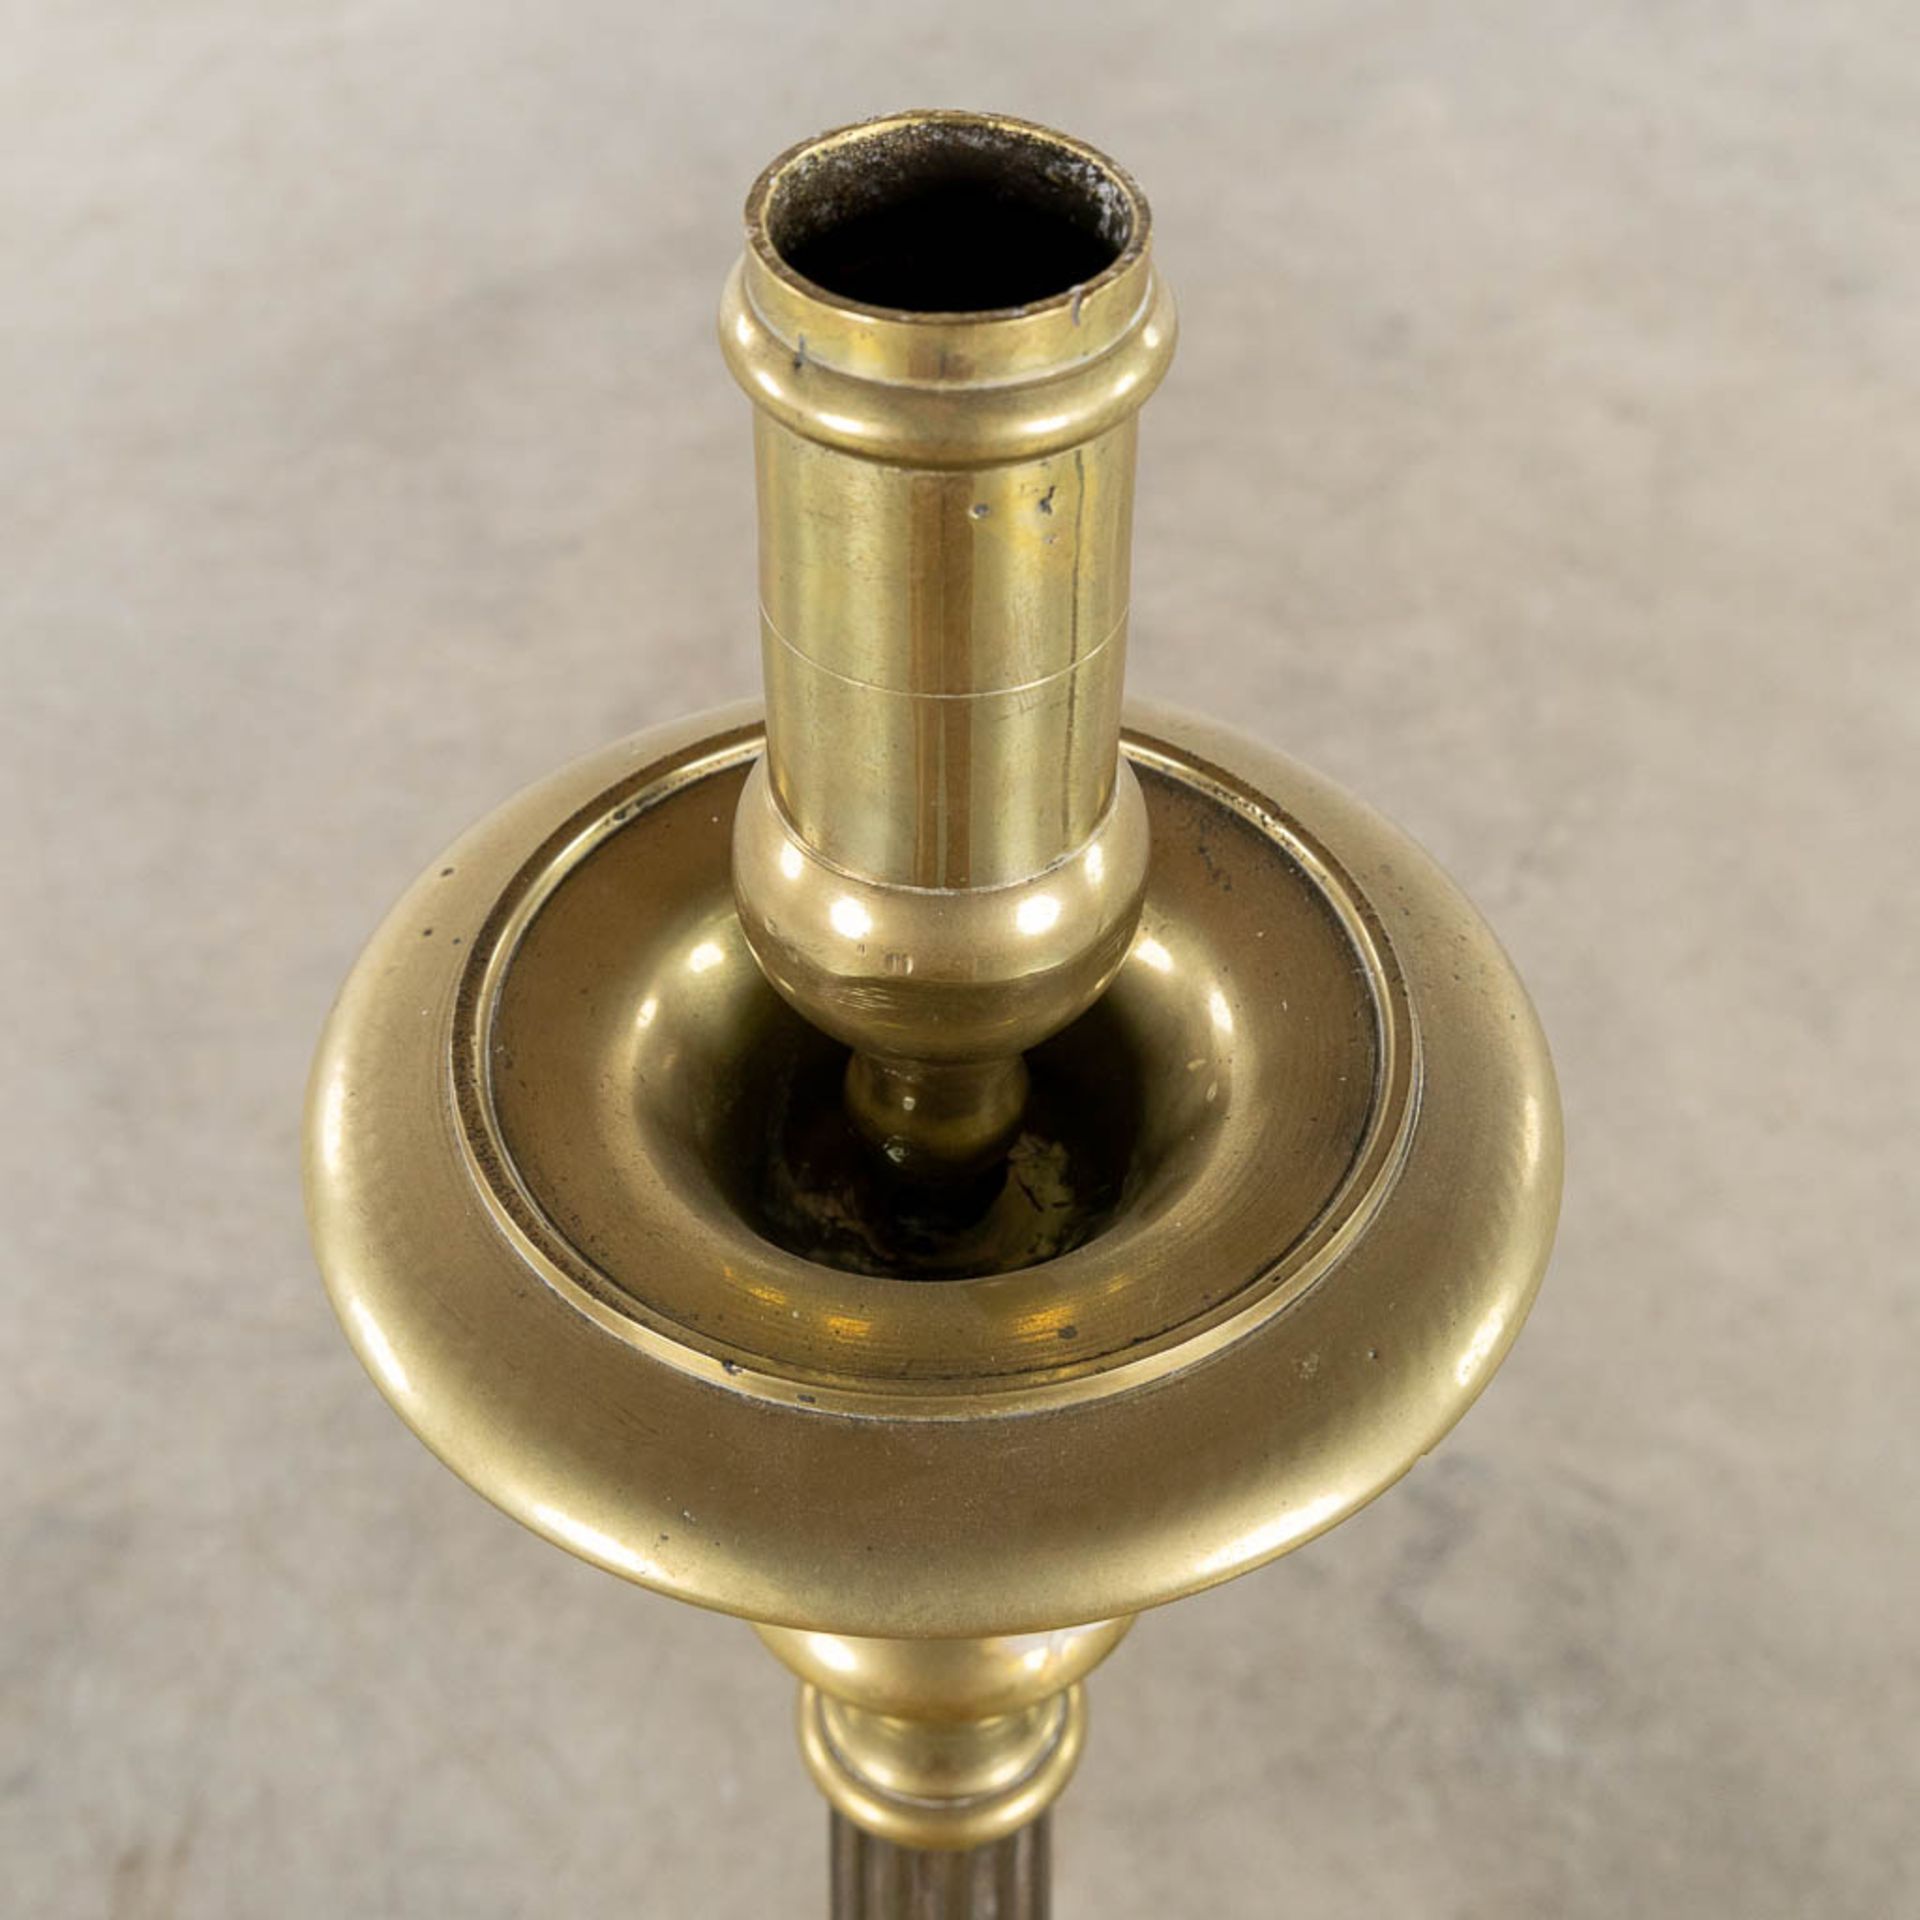 A pair of bronze church candlesticks/candle holders, Louis XV style. Circa 1900. (W:23 x H:105 cm) - Image 18 of 19